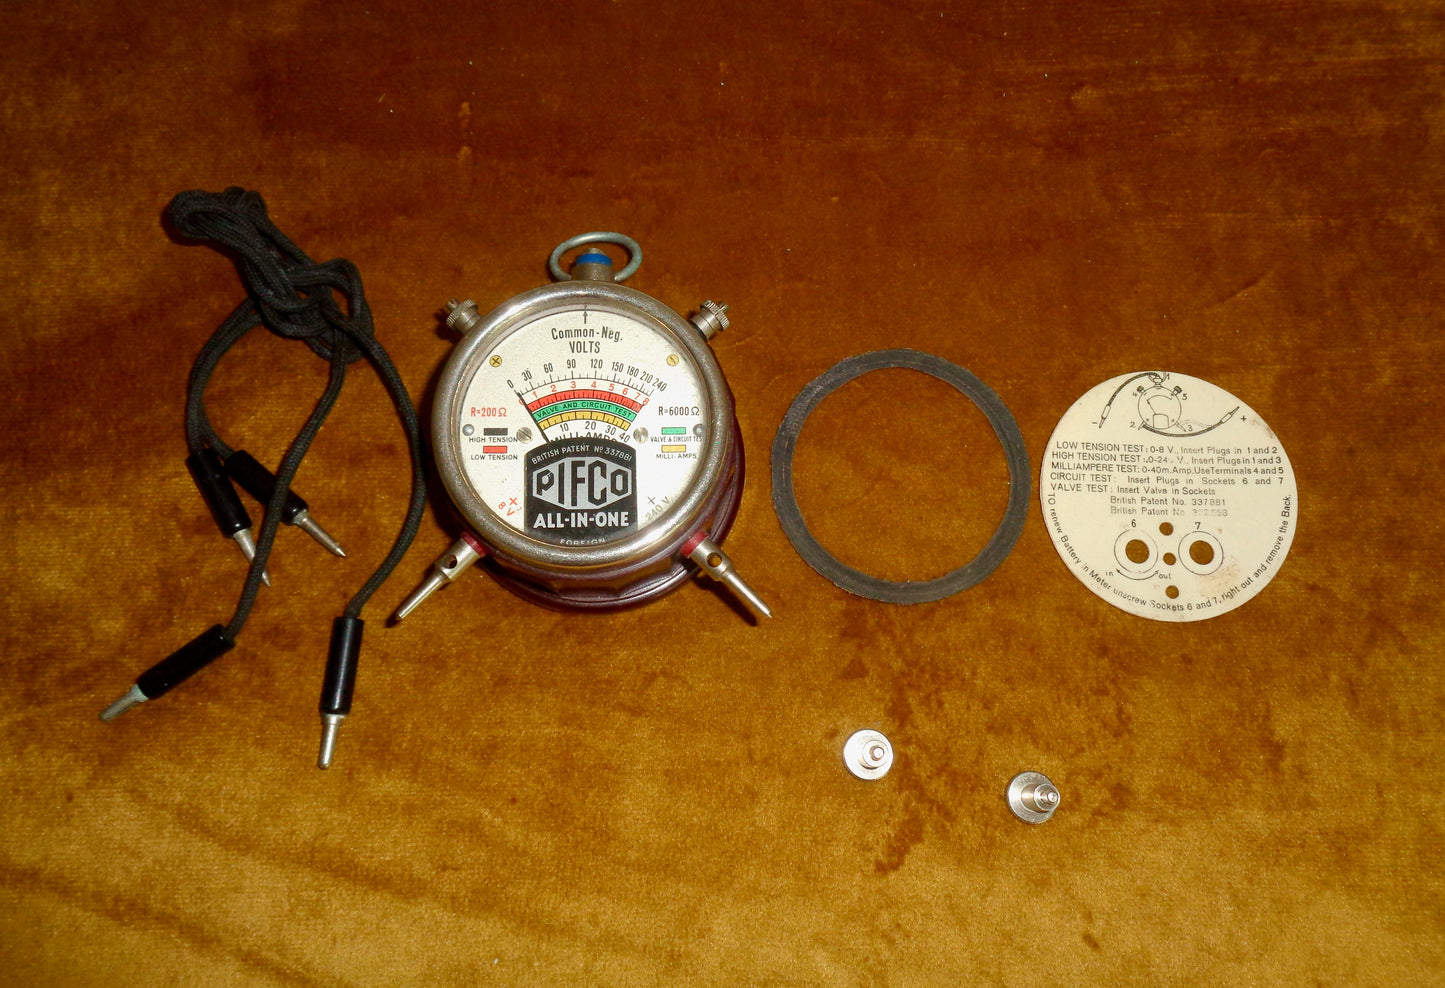 1930s Pifco All In One Pocket Voltmeter Ammeter